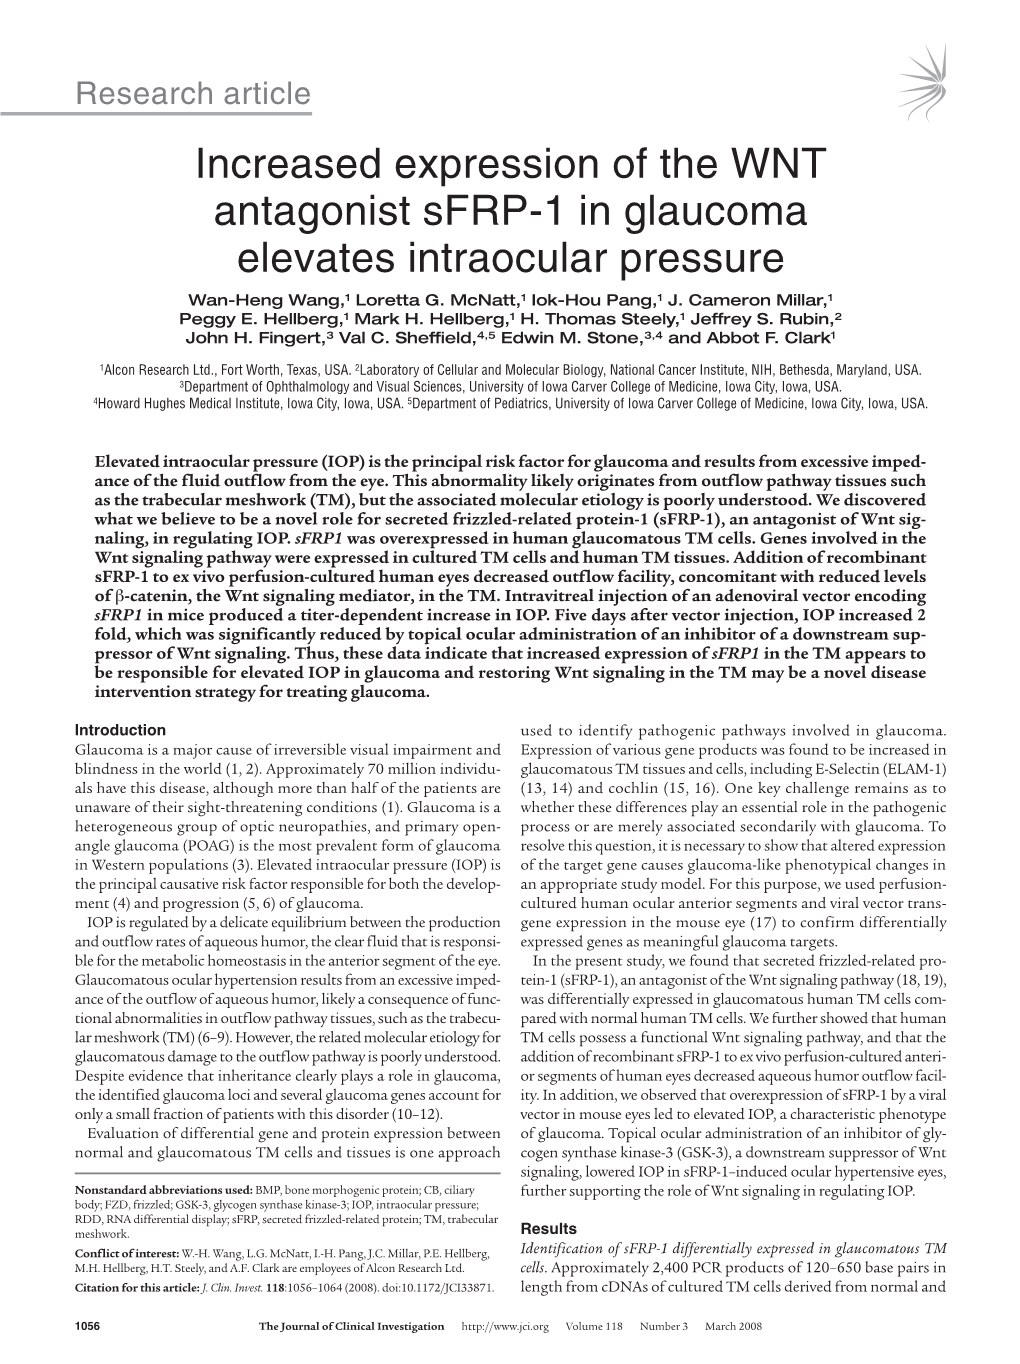 Increased Expression of the WNT Antagonist Sfrp-1 in Glaucoma Elevates Intraocular Pressure Wan-Heng Wang,1 Loretta G